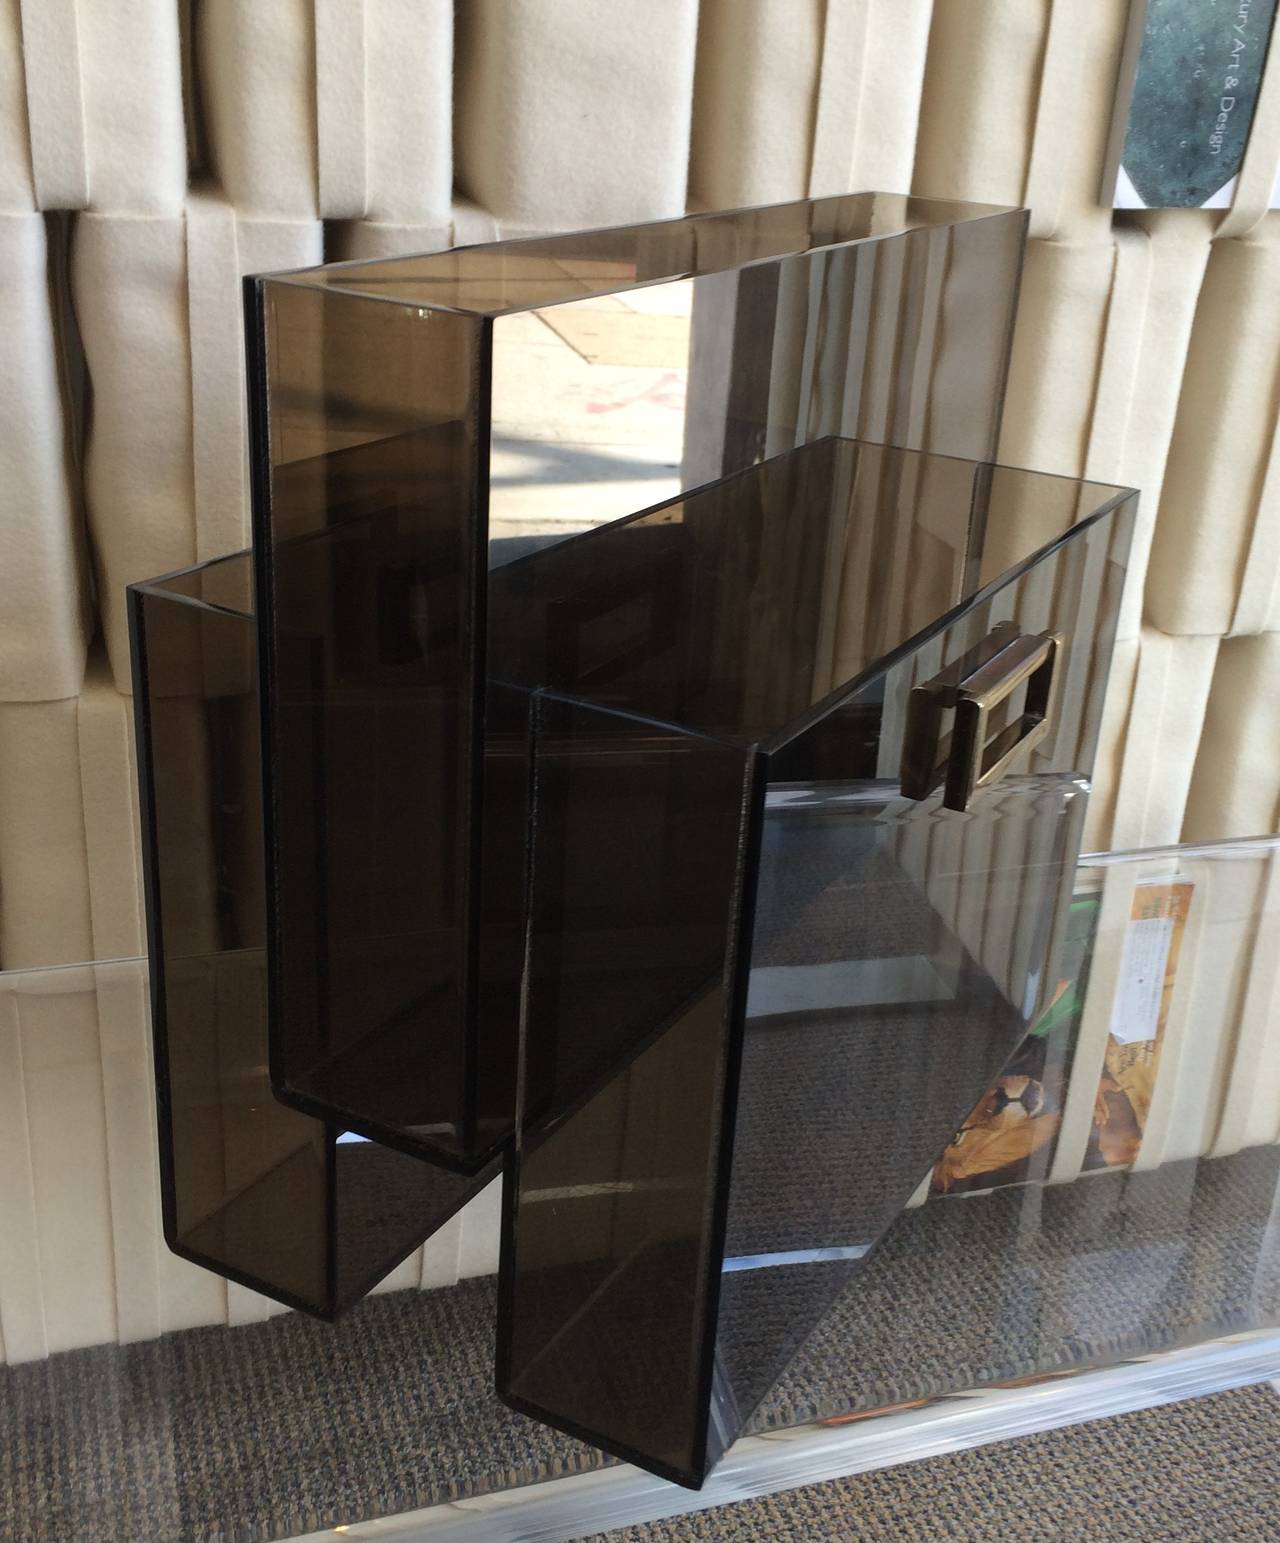 Magazine rack in smoked Lucite and brass handles designed in the 1960s by Charles Hollis Jones.
The magazine holder is from the 